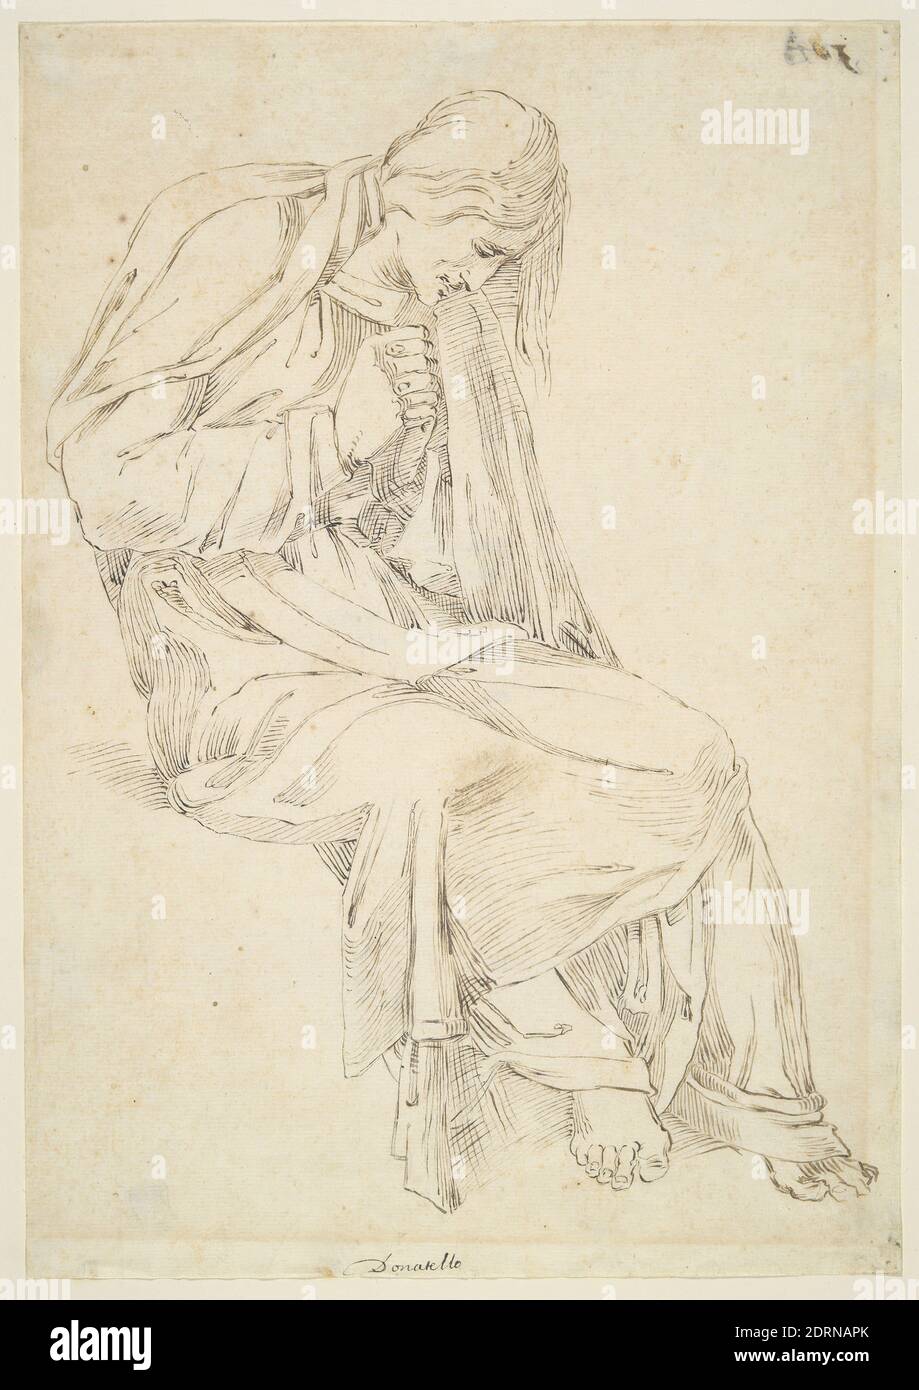 Artist, copy after: Donatello (Donato di Niccolò di Betto Bardi), Italian, Florence, 1386/87–1466, Mater Dolorosa, copied from the Lamentation of the San Lorenzo Pulpit, 17th–18th century, Pen and brown ink, over traces of graphite, 29.8 × 20.8 cm (11 3/4 × 8 3/16 in.), Italian, 17th–18th century, Works on Paper - Drawings and Watercolors Stock Photo